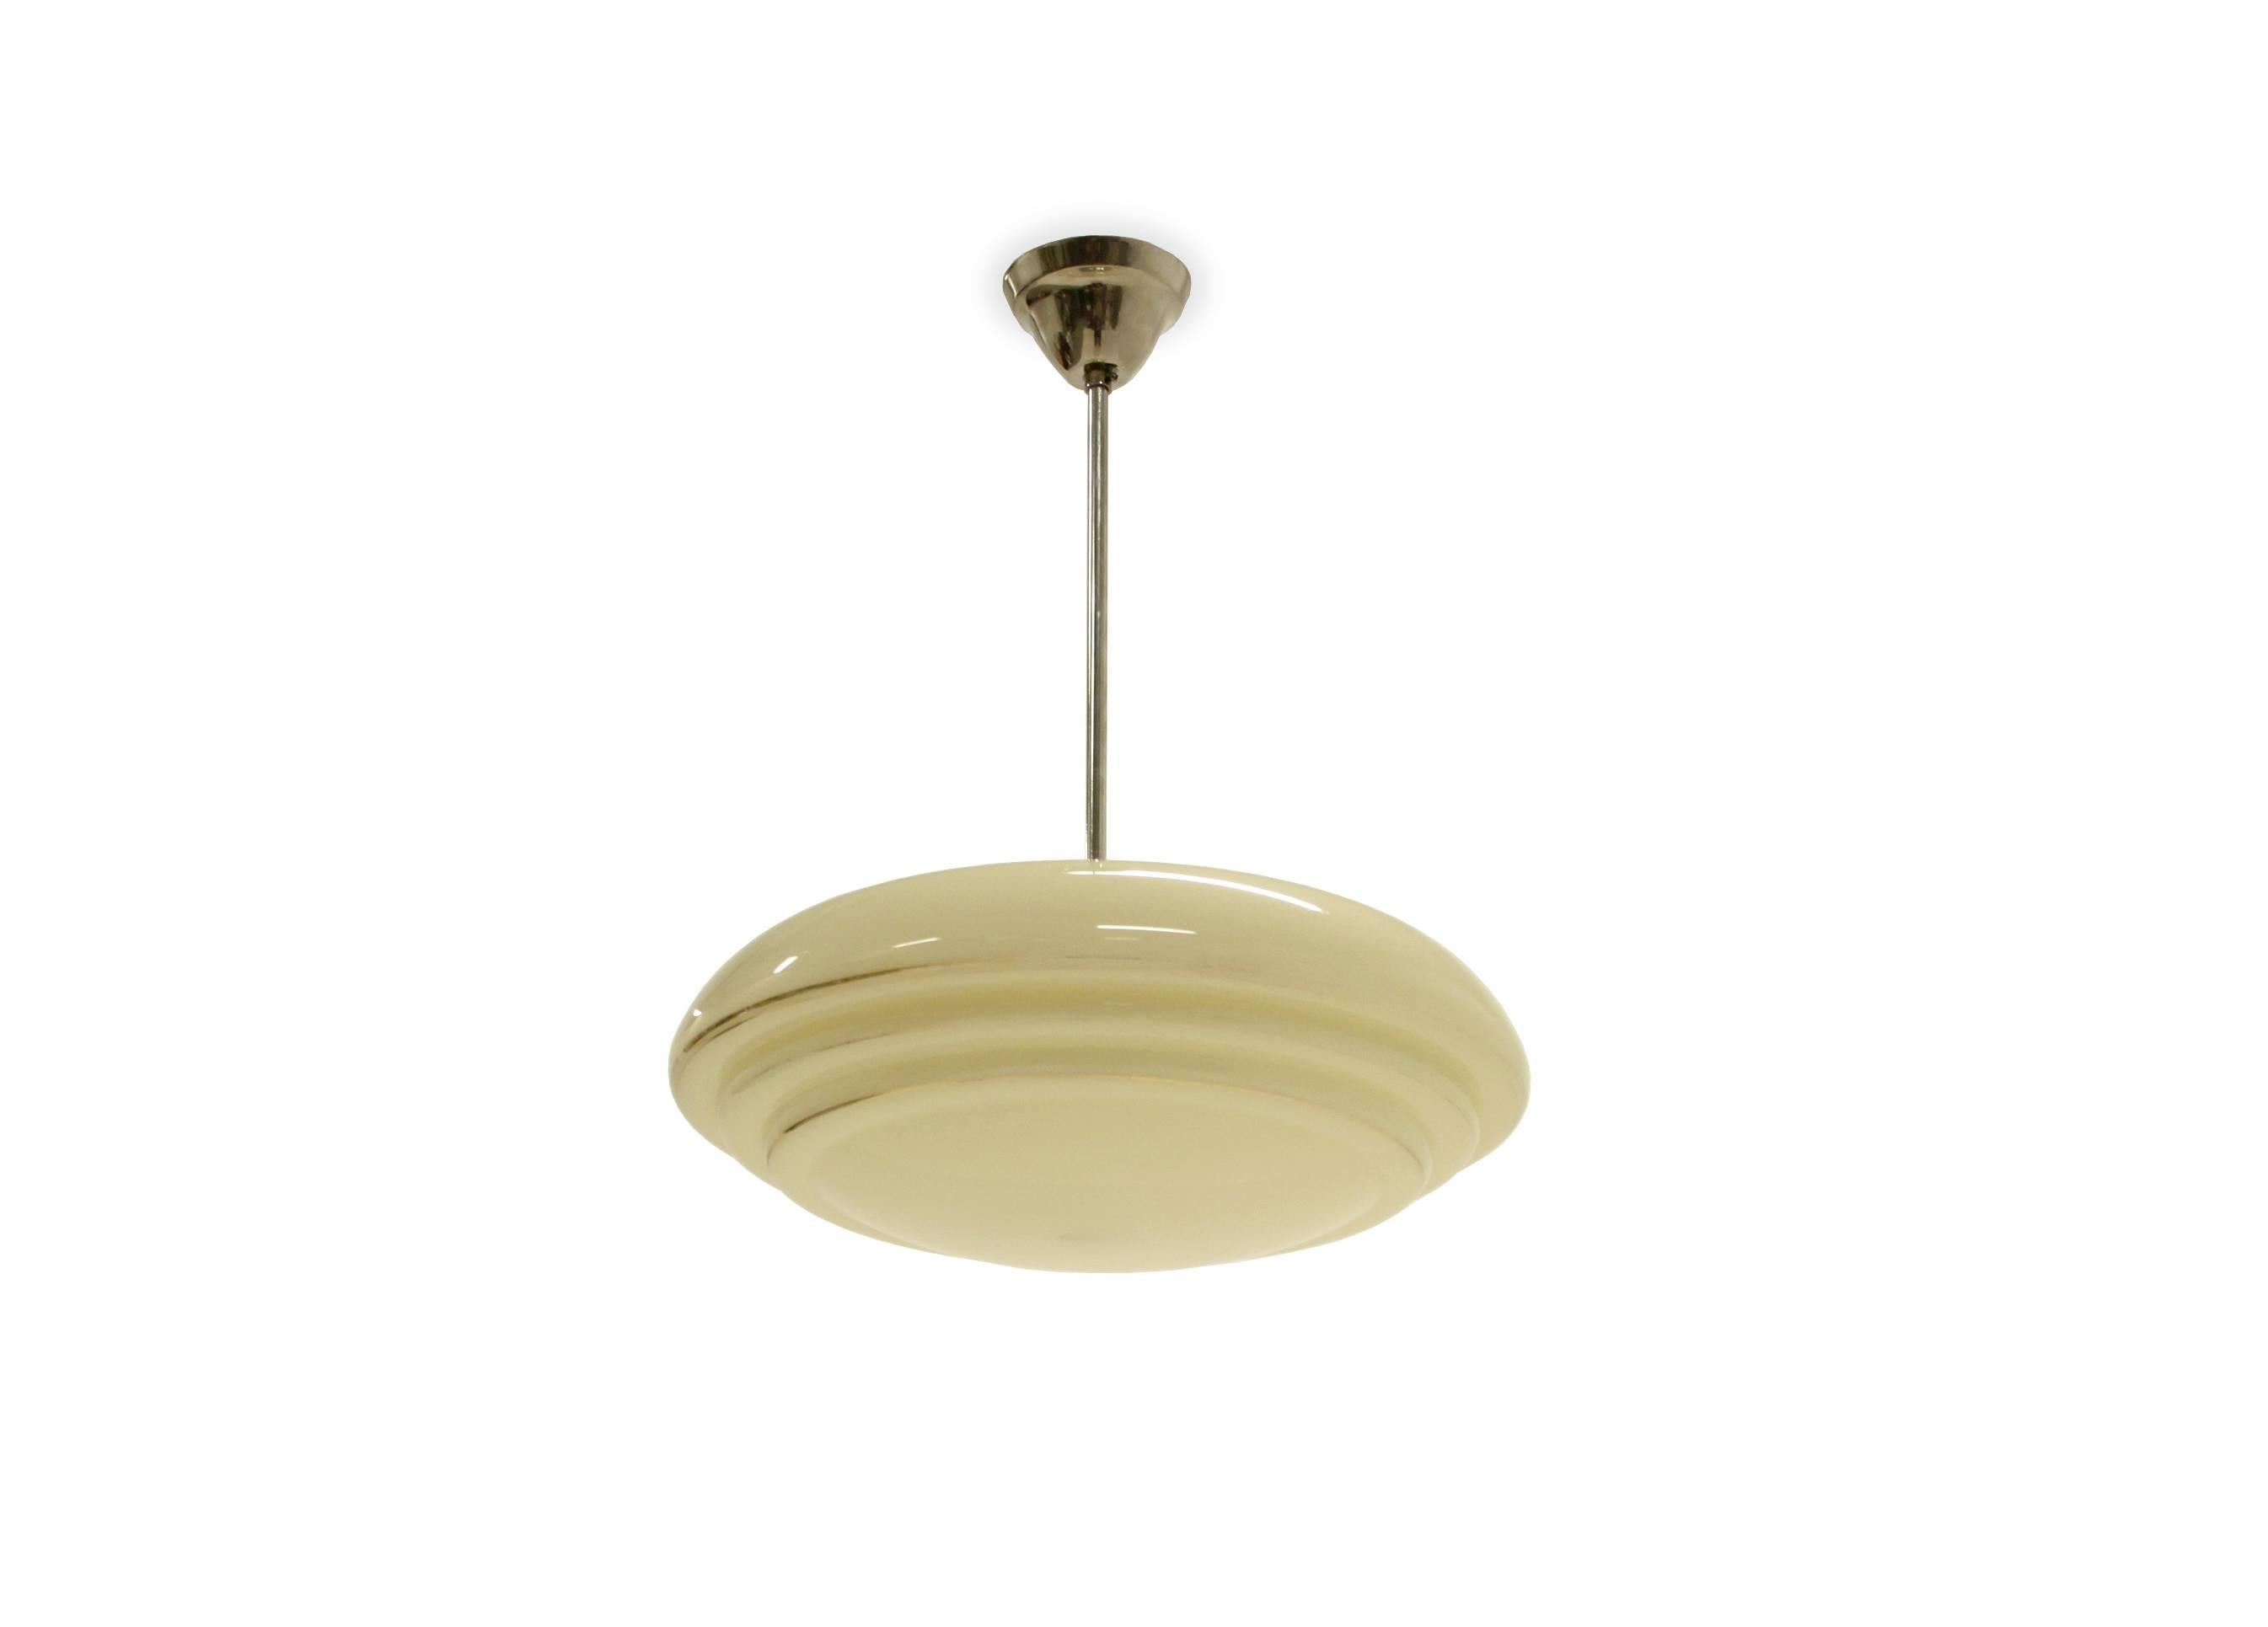 Circular ceiling lamp in opaline glass and stem in chrome.

Designed and made in Norway by T. Røste & Co, circa 1950s second half.

The lamp is fully working and in good vintage conditon with normal wear.
 